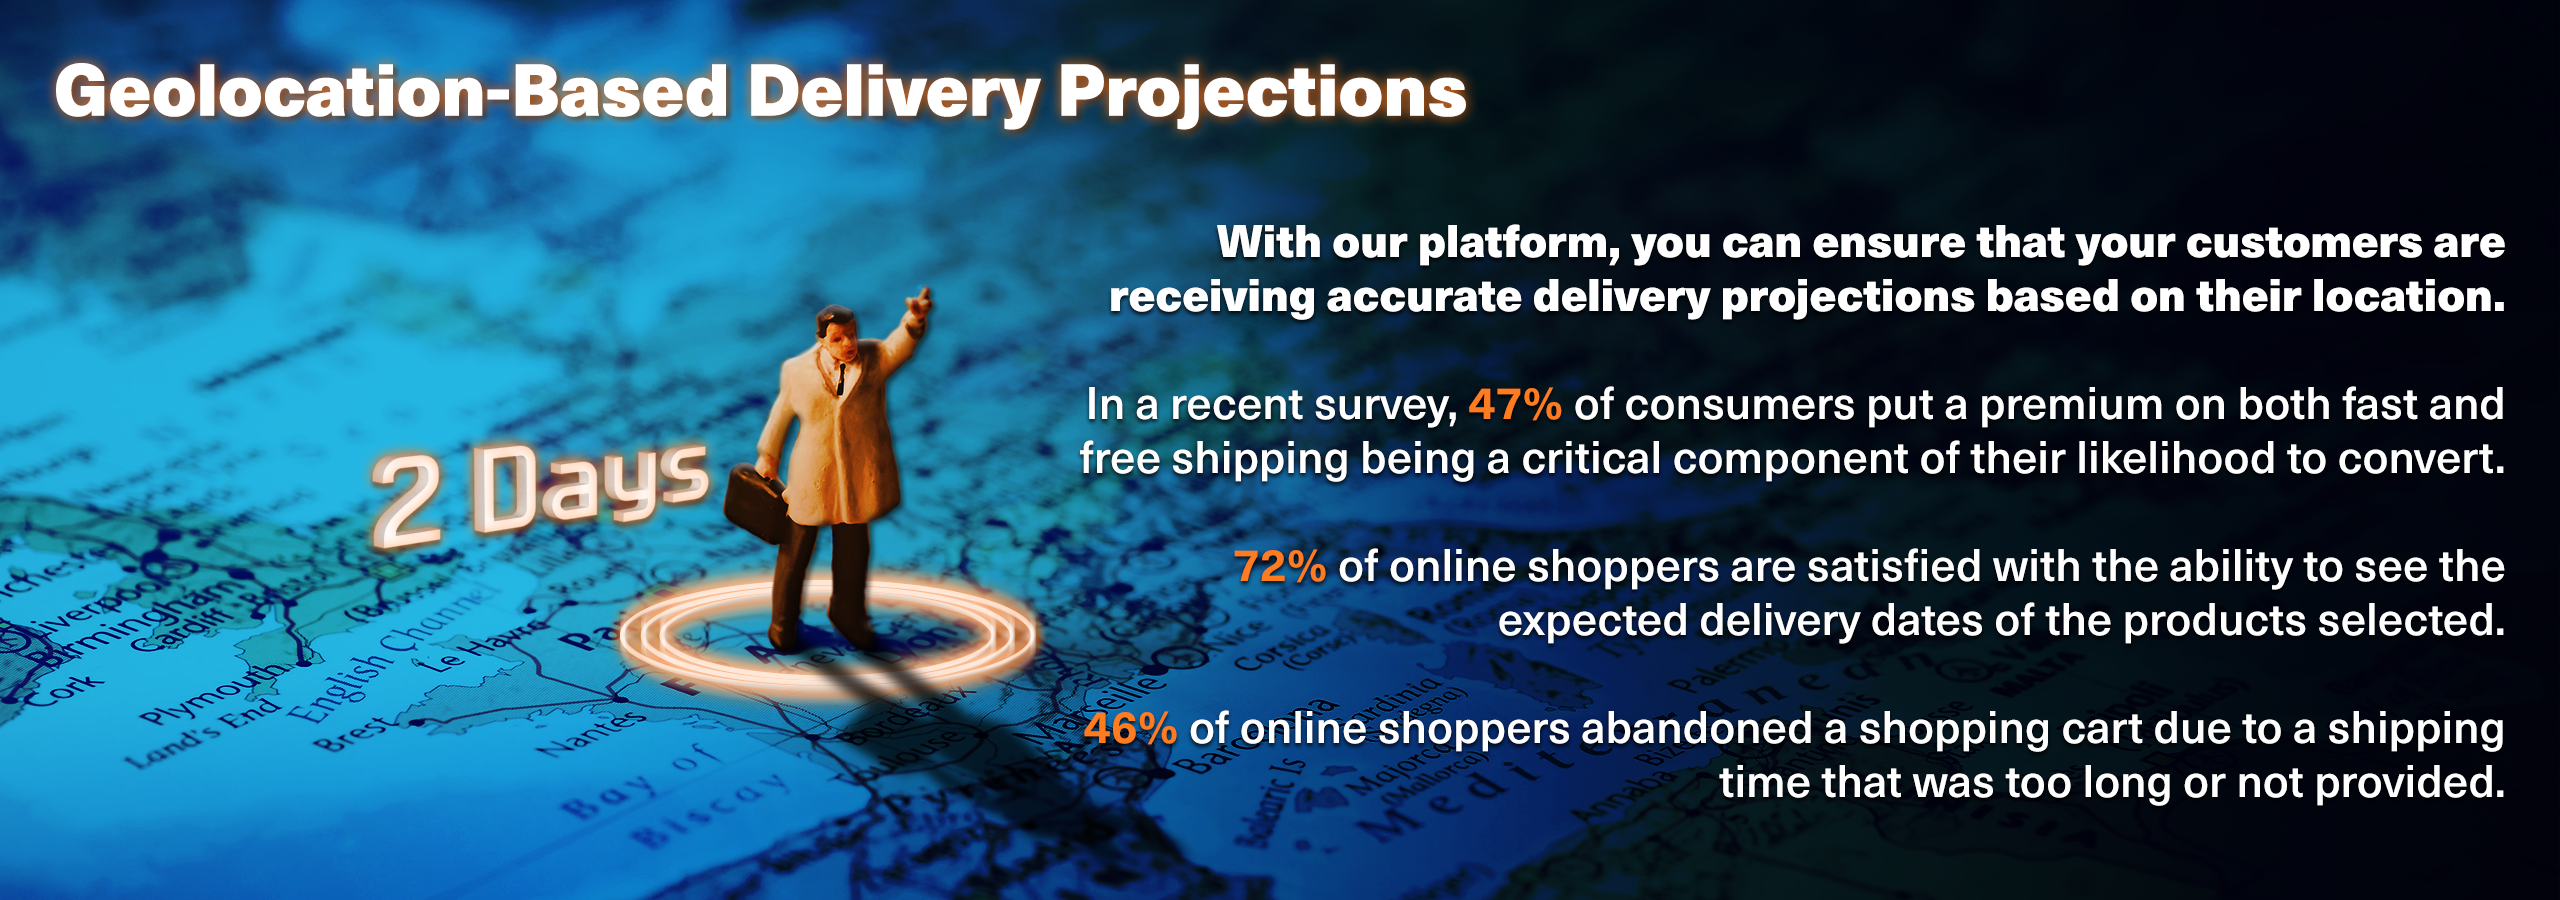 With our platform, you can ensure that your customers are receiving accurate delivery projections based on their location.